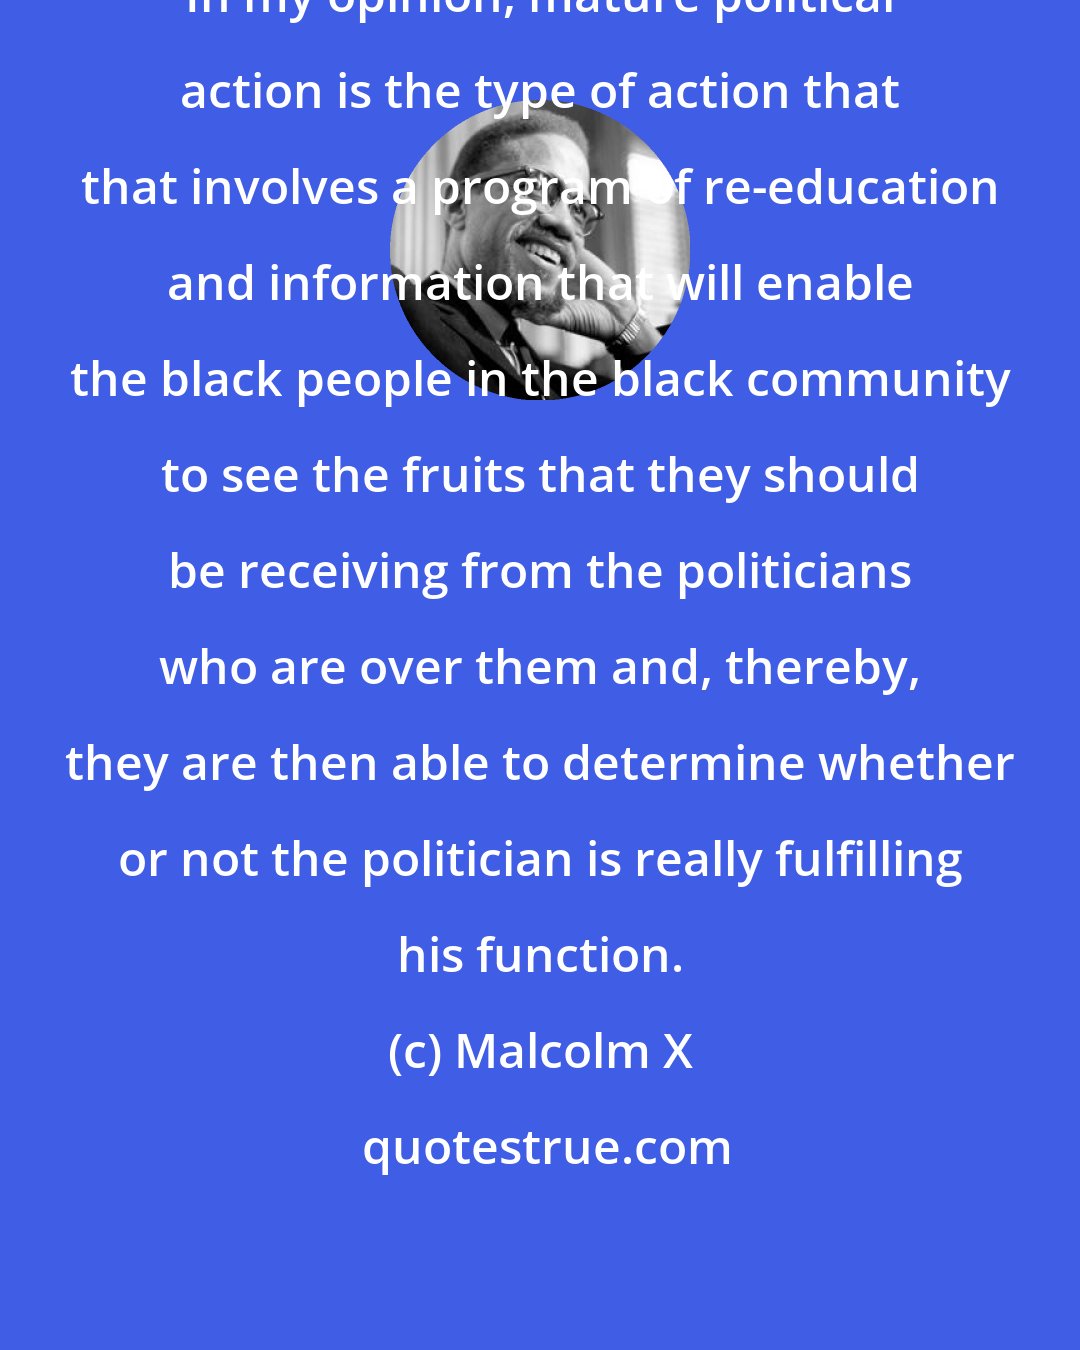 Malcolm X: In my opinion, mature political action is the type of action that that involves a program of re-education and information that will enable the black people in the black community to see the fruits that they should be receiving from the politicians who are over them and, thereby, they are then able to determine whether or not the politician is really fulfilling his function.